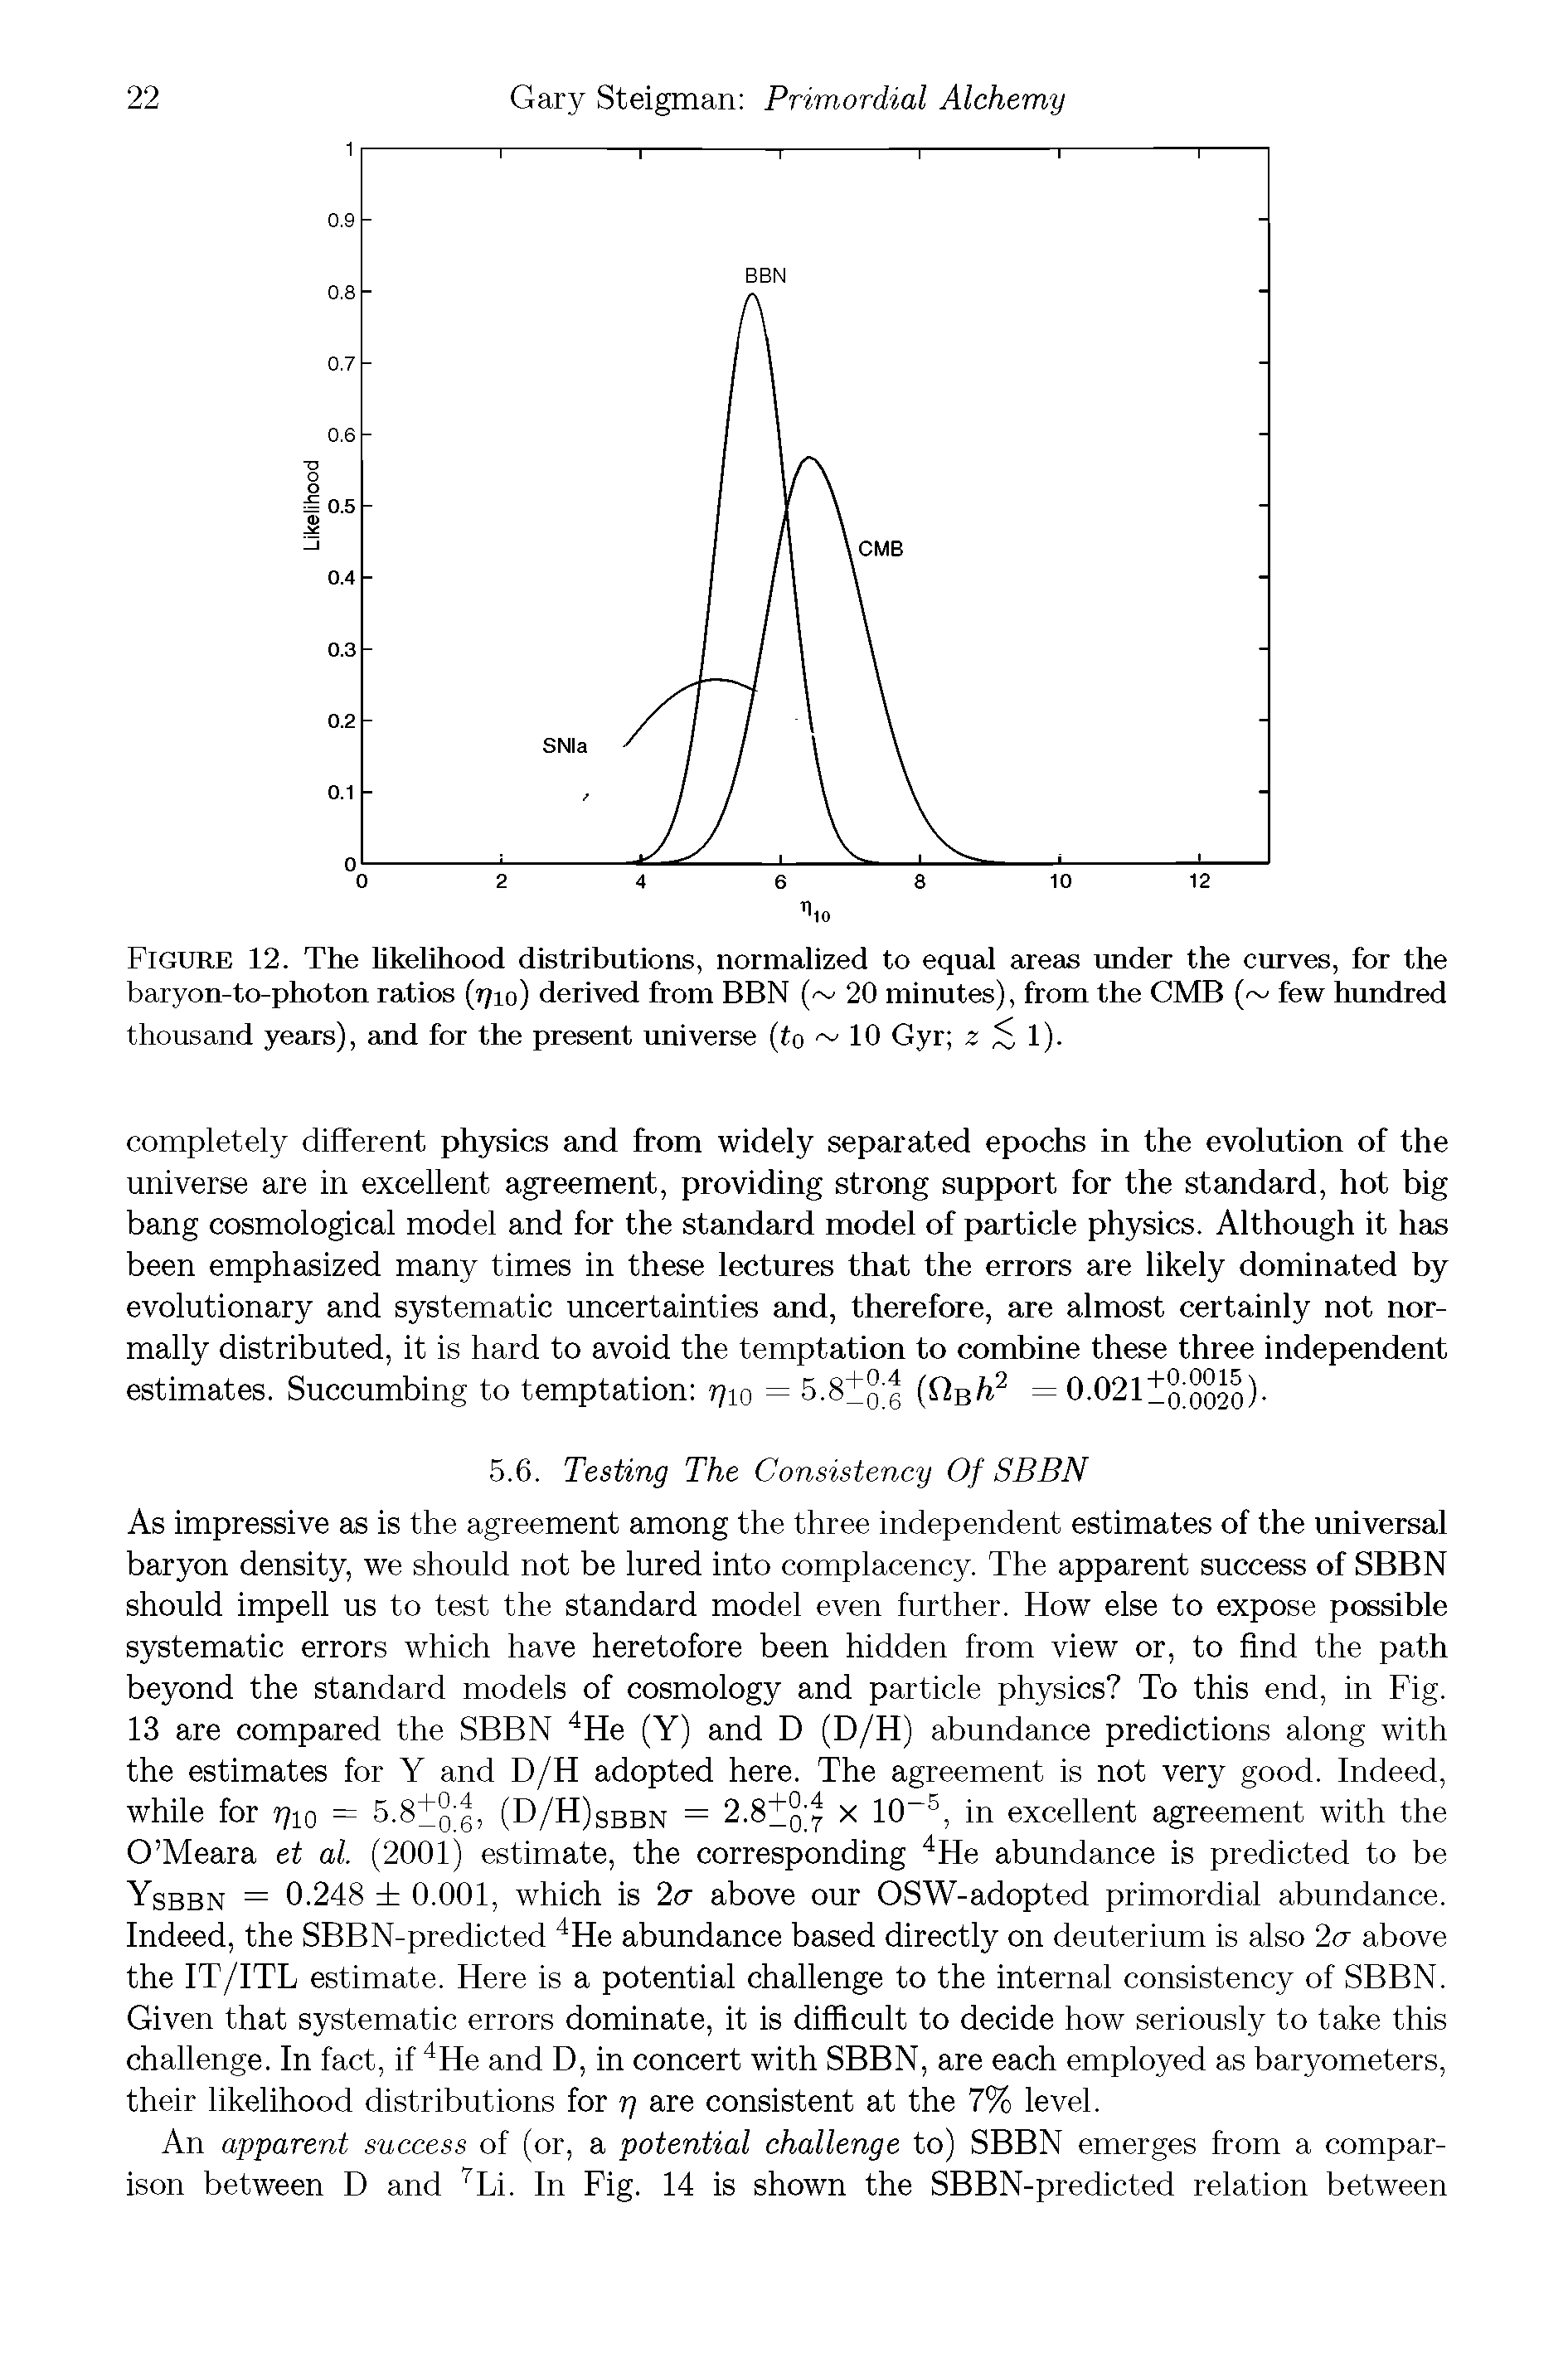 Figure 12. The likelihood distributions, normalized to equal areas under the curves, for the baryon-to-photon ratios (r/io) derived from BBN ( 20 minutes), from the CMB ( few hundred thousand years), and for the present universe (to 10 Gyr z 1).